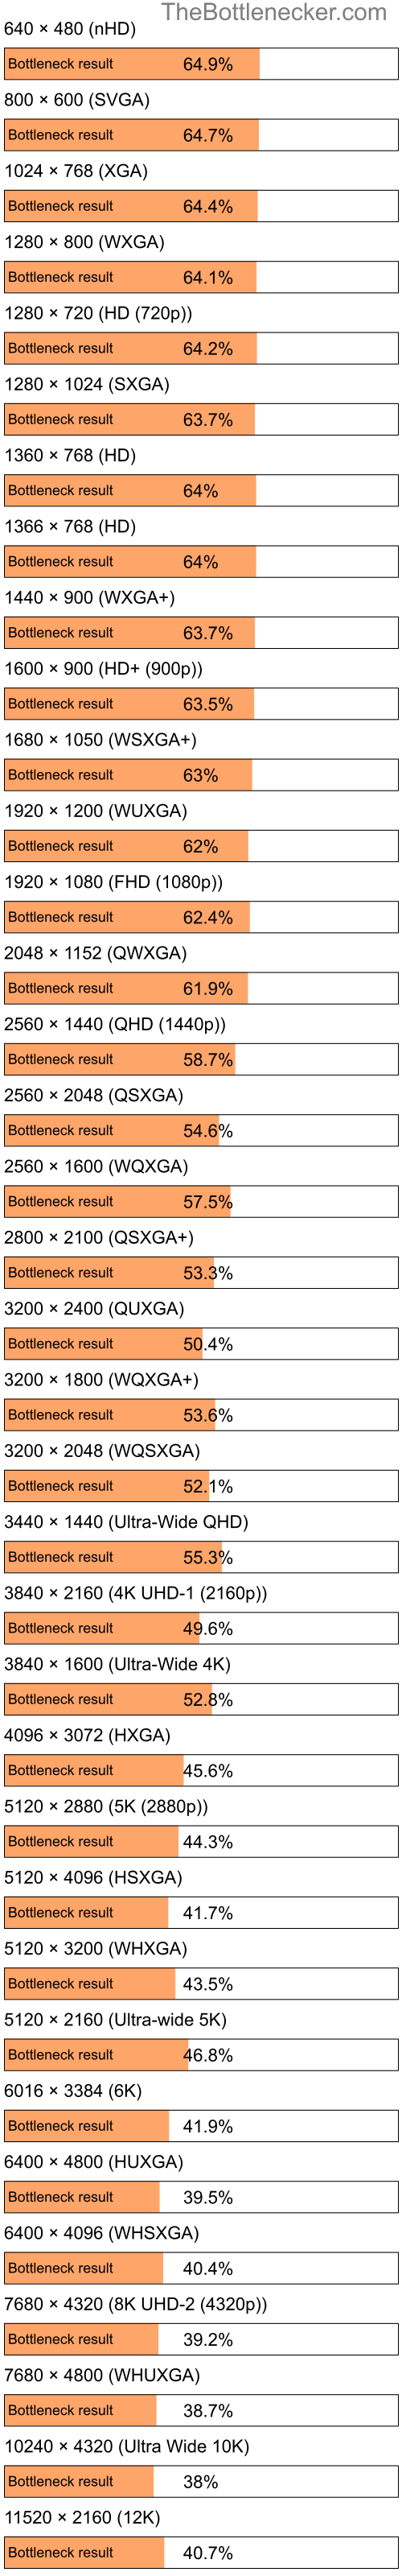 Bottleneck results by resolution for Intel Core i3-3225 and NVIDIA GeForce RTX 3070 in Graphic Card Intense Tasks